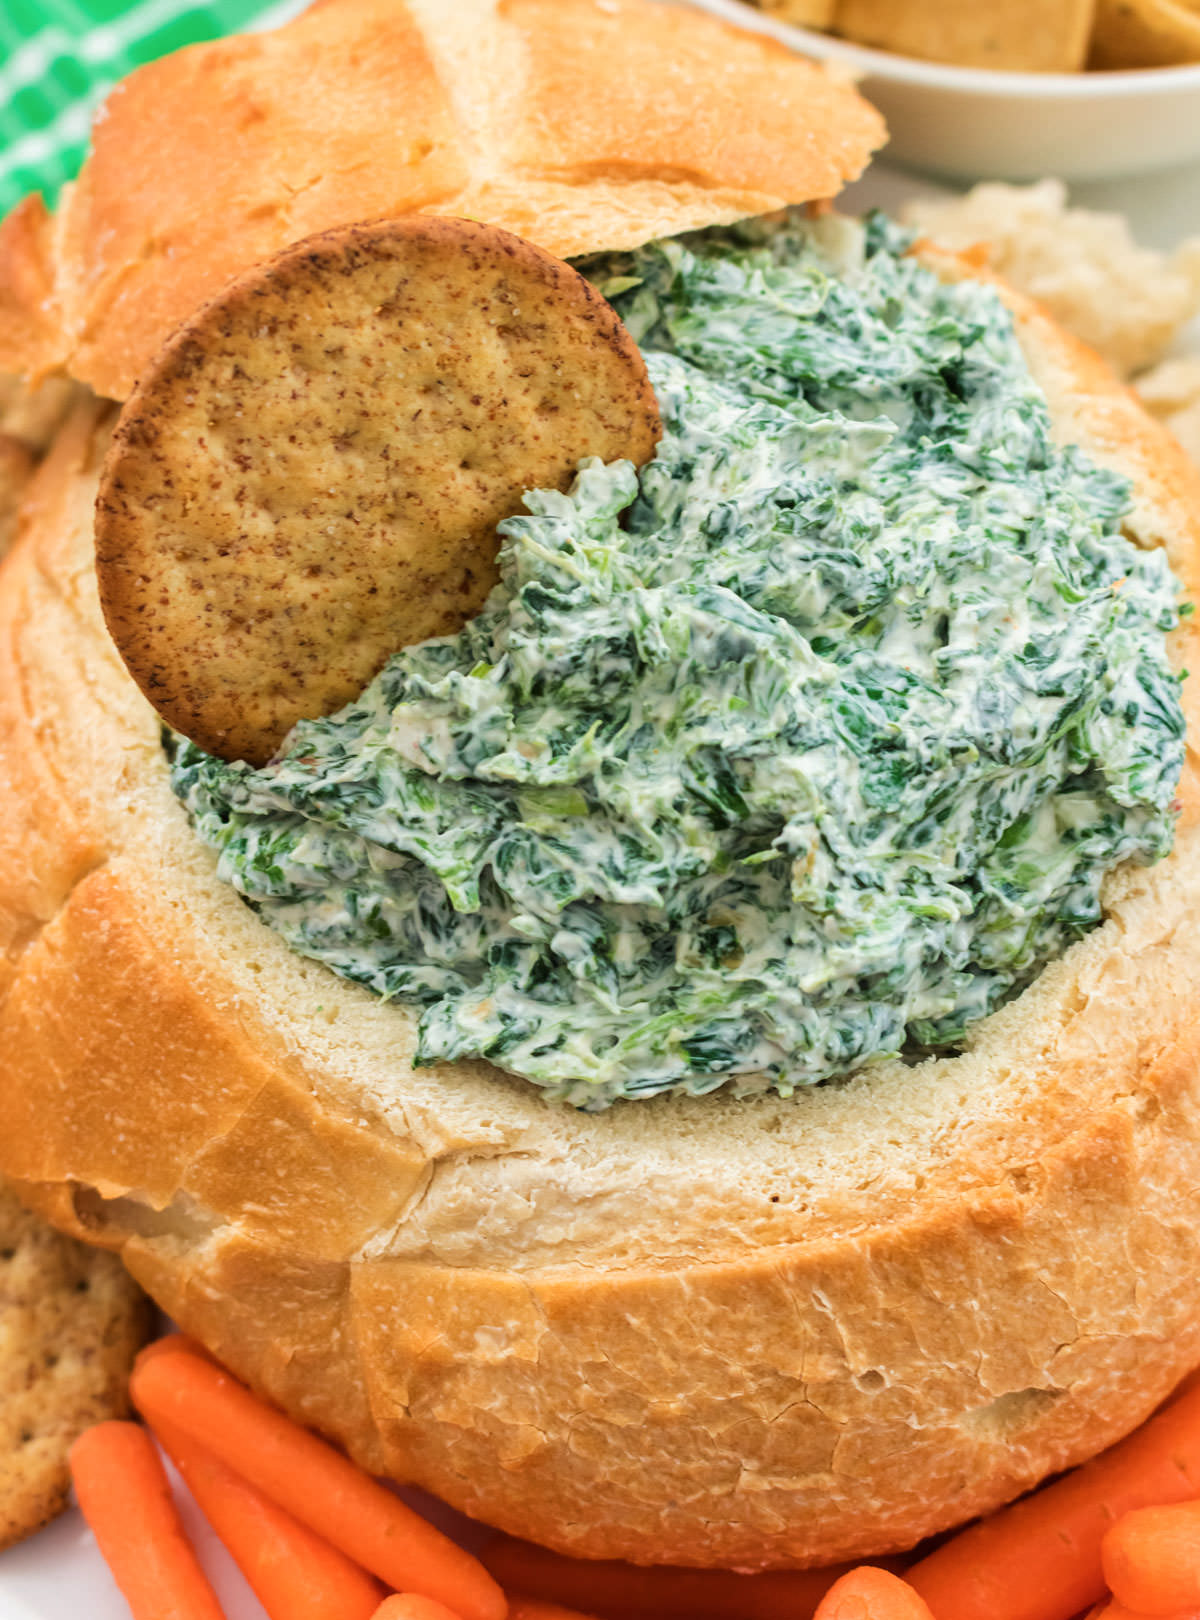 Closeup on a batch of Spinach Dip in a hollowed up loaf of sourdough bread surrounded by carrots, crackers and pieces of bread.